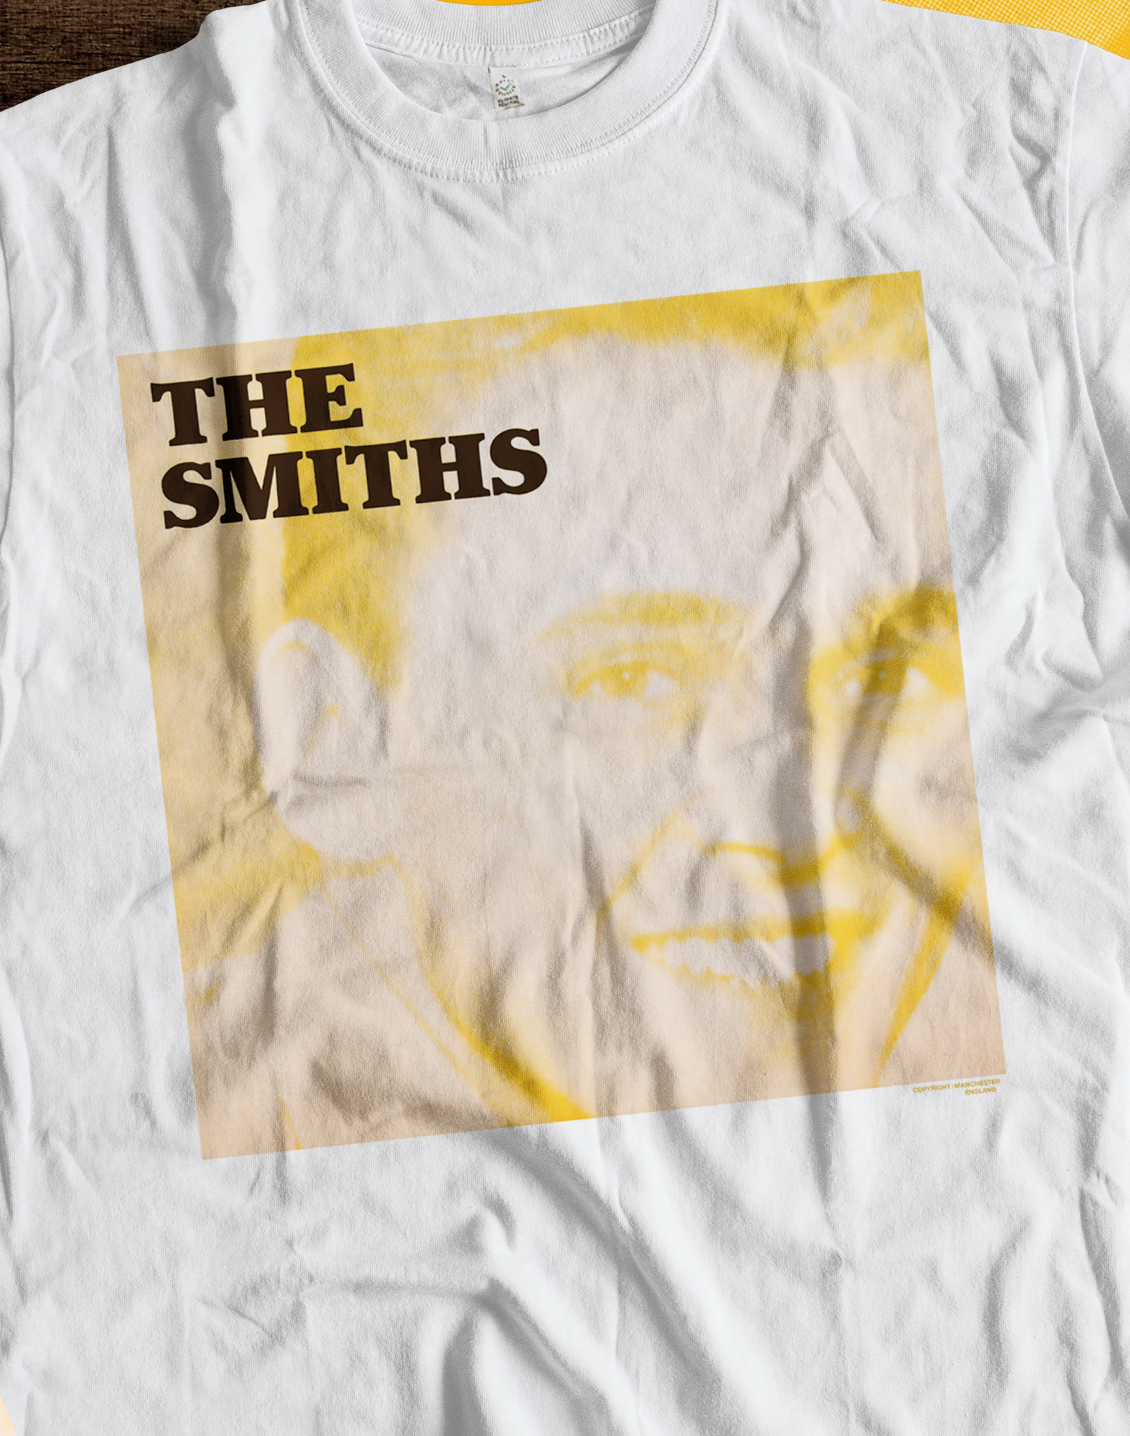 THE SMITHS - LAST NIGHT I DREAMT THAT SOMEBODY LOVED ME - 1987 - UK 12"